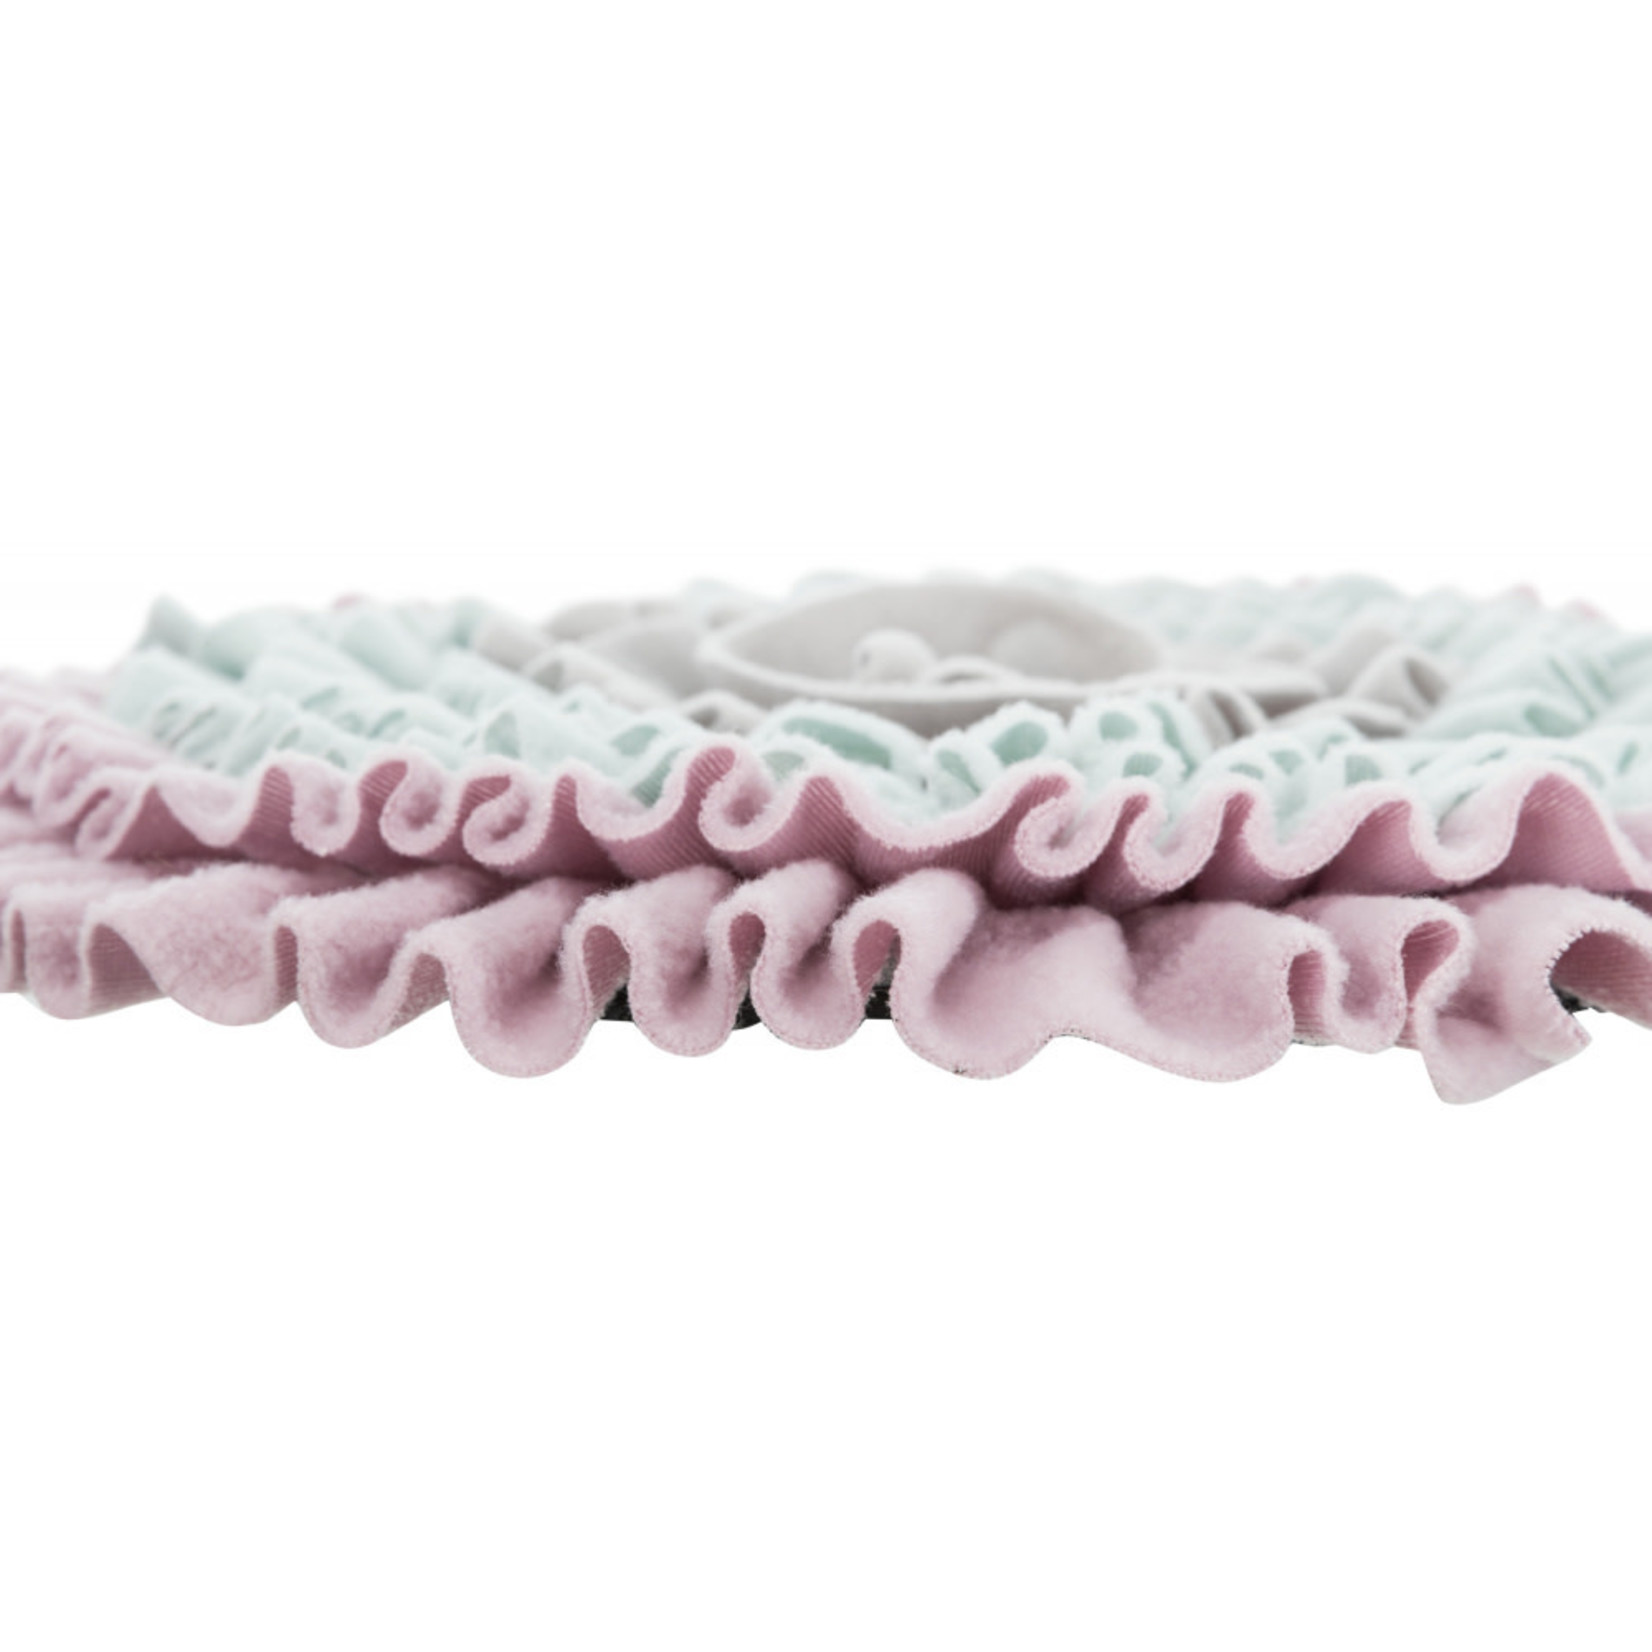 Trixie Sniffing Snuffle Mat for Puppies & Kittens, 38cm